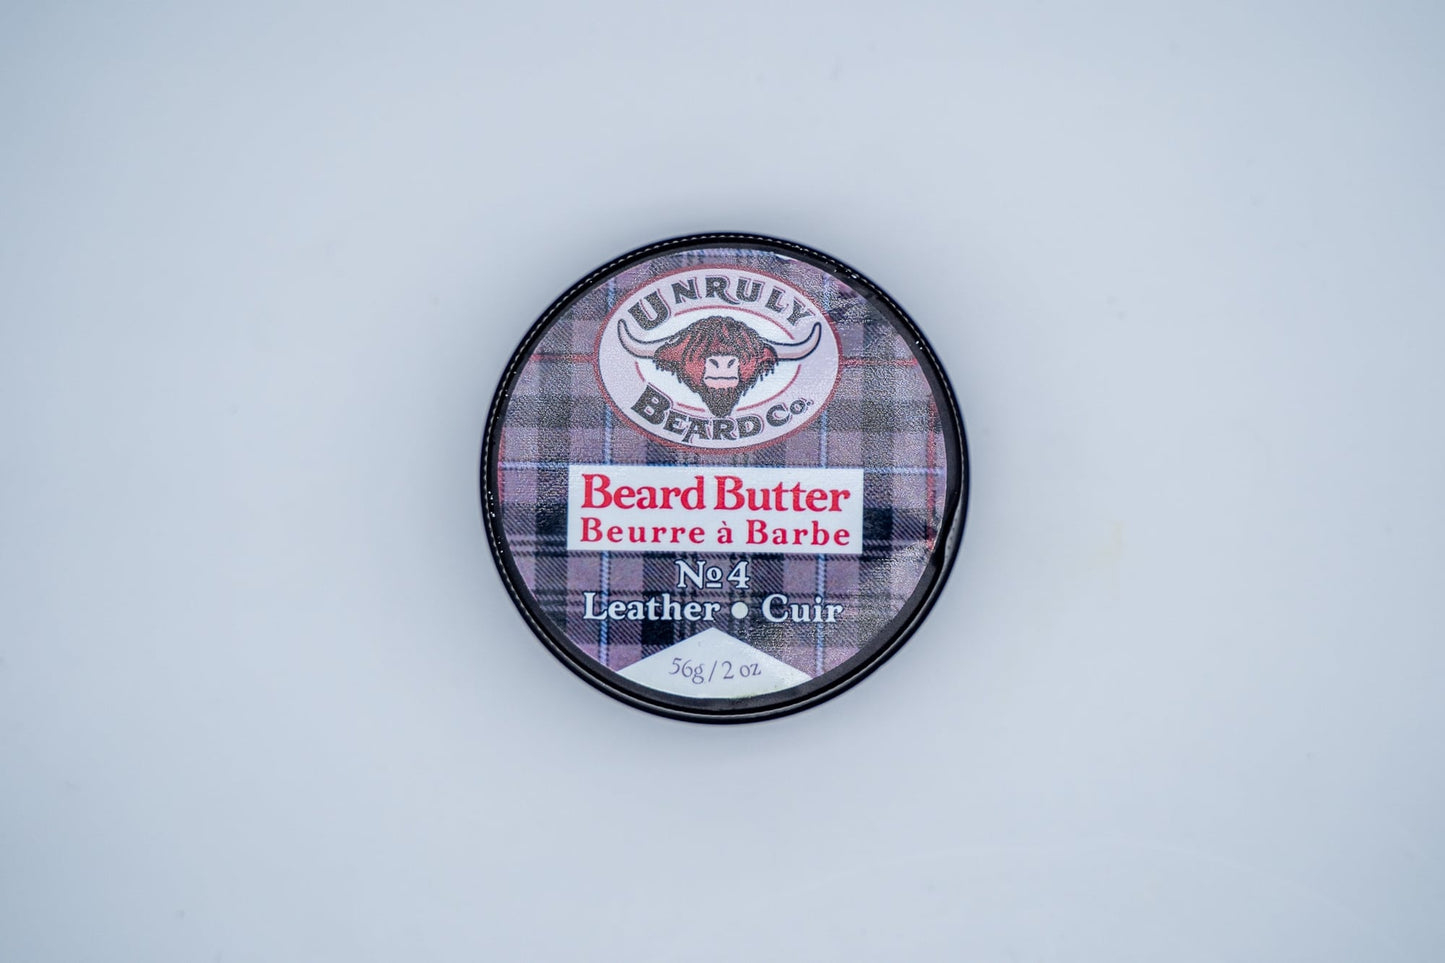 Beard Butter - No. 14 Leather